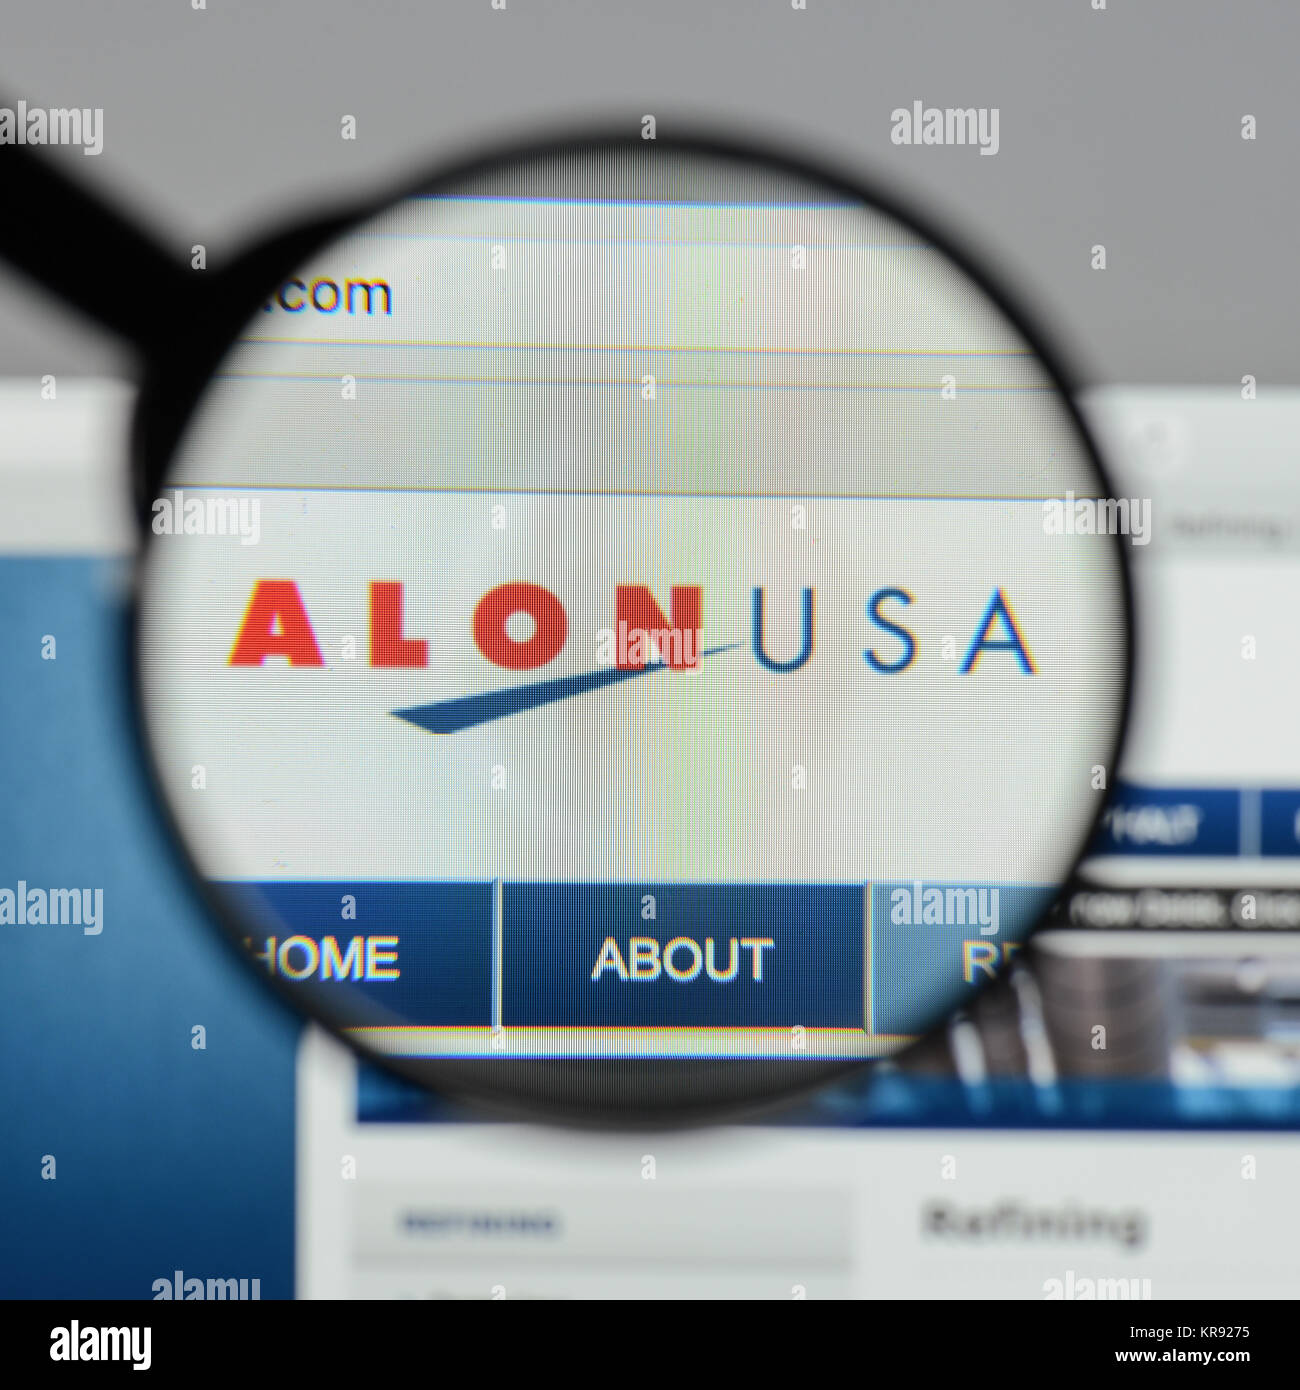 Milan, Italy - August 10, 2017: Alon USA Energy website homepage. It was an independent refiner and marketer of petroleum products. Alon USA logo visi Stock Photo